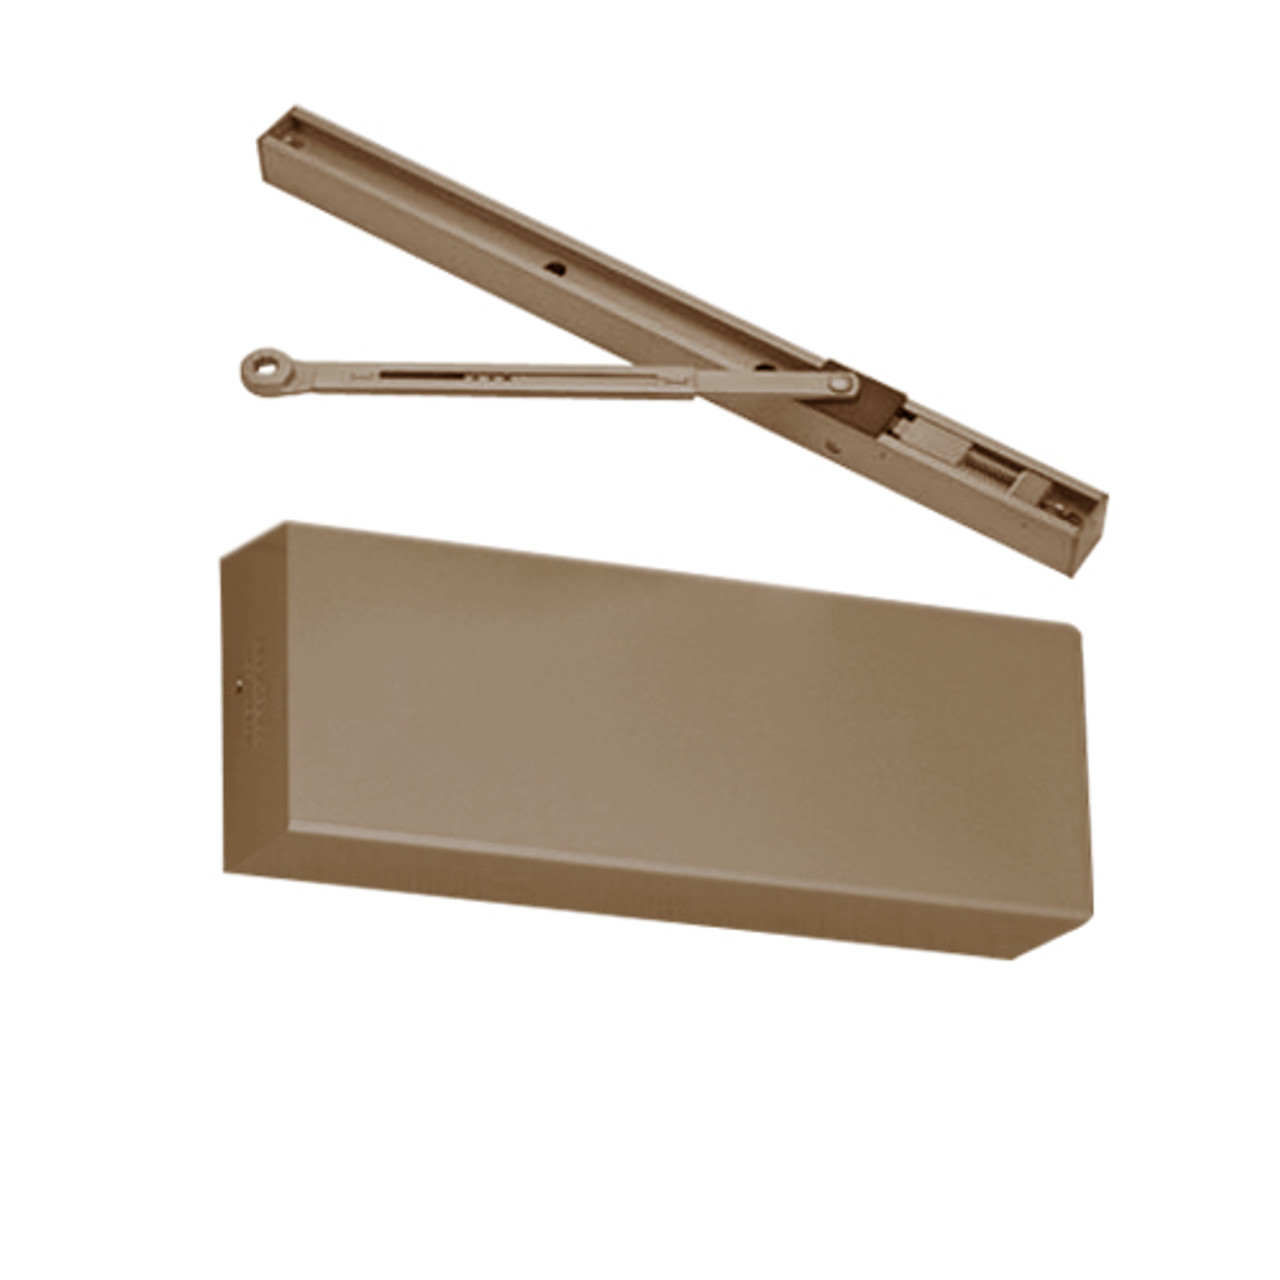 PS9500STDA-691 Norton 9500 Series Non-Hold Open Cast Iron Door Closer with Push Side Slide Track in Dull Bronze Finish